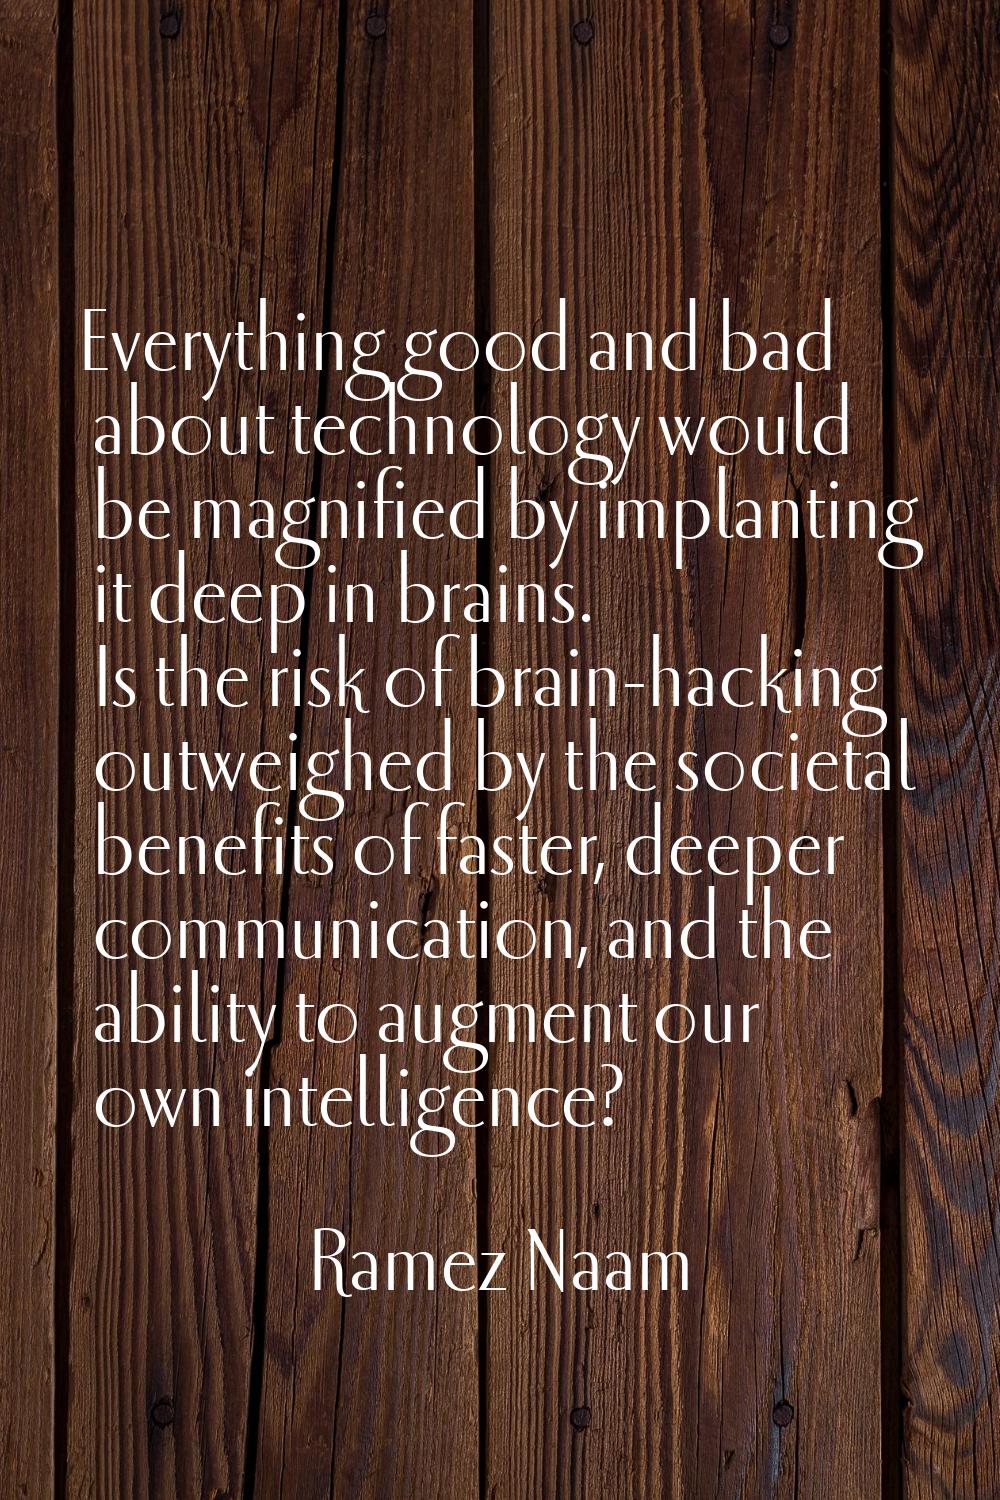 Everything good and bad about technology would be magnified by implanting it deep in brains. Is the